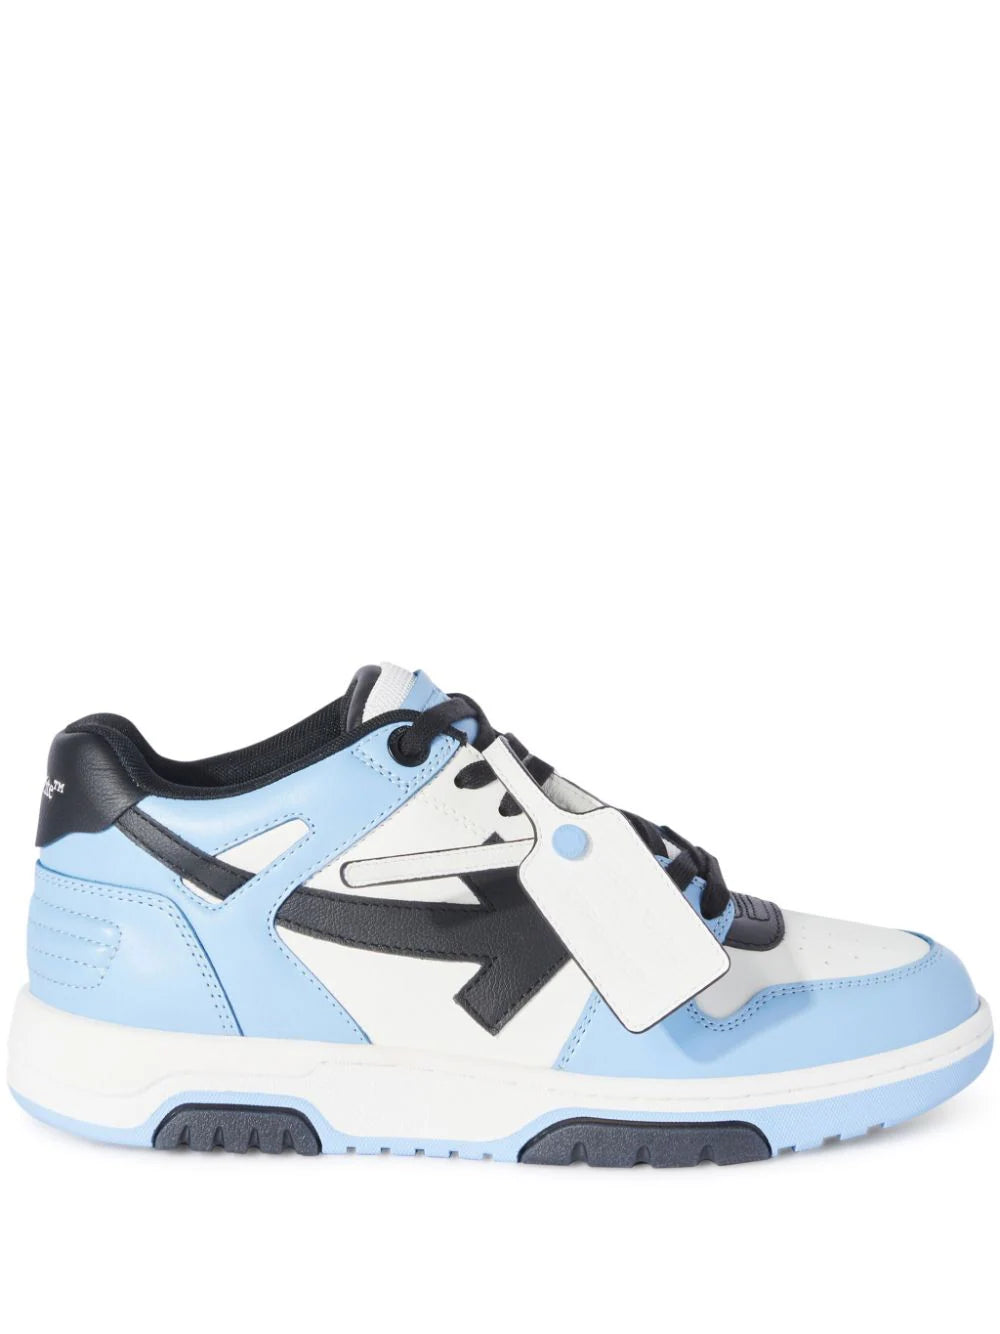 OFF-WHITE MEN Out Of Office Low Top Leather Sneakers White/Light Blue - MAISONDEFASHION.COM